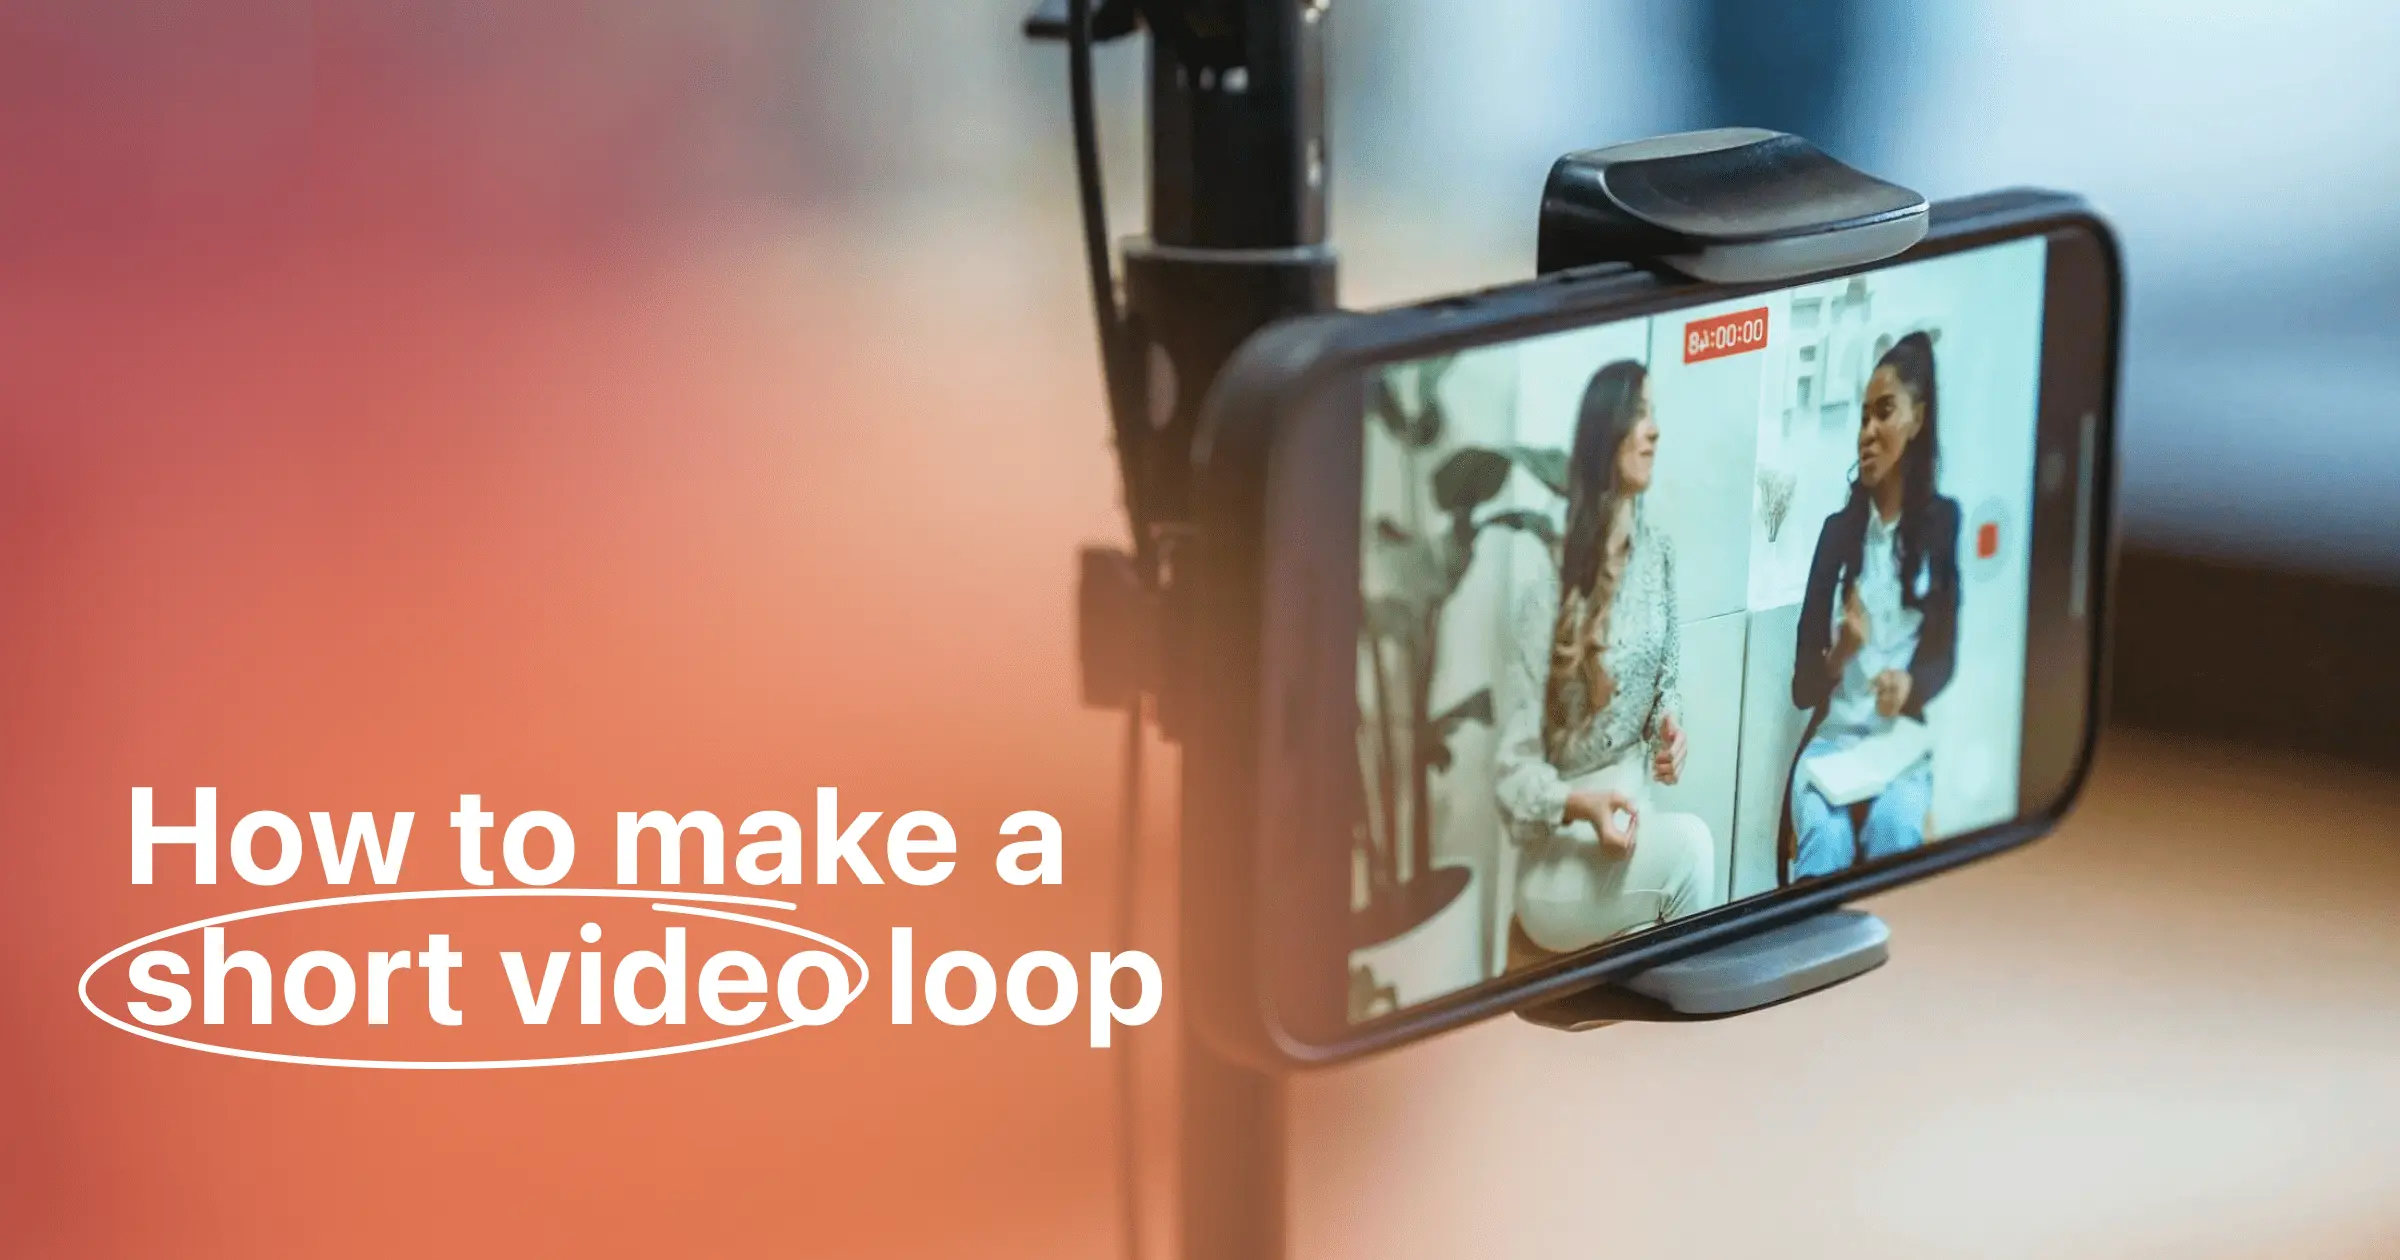 how to Loop a Video on Your Phone